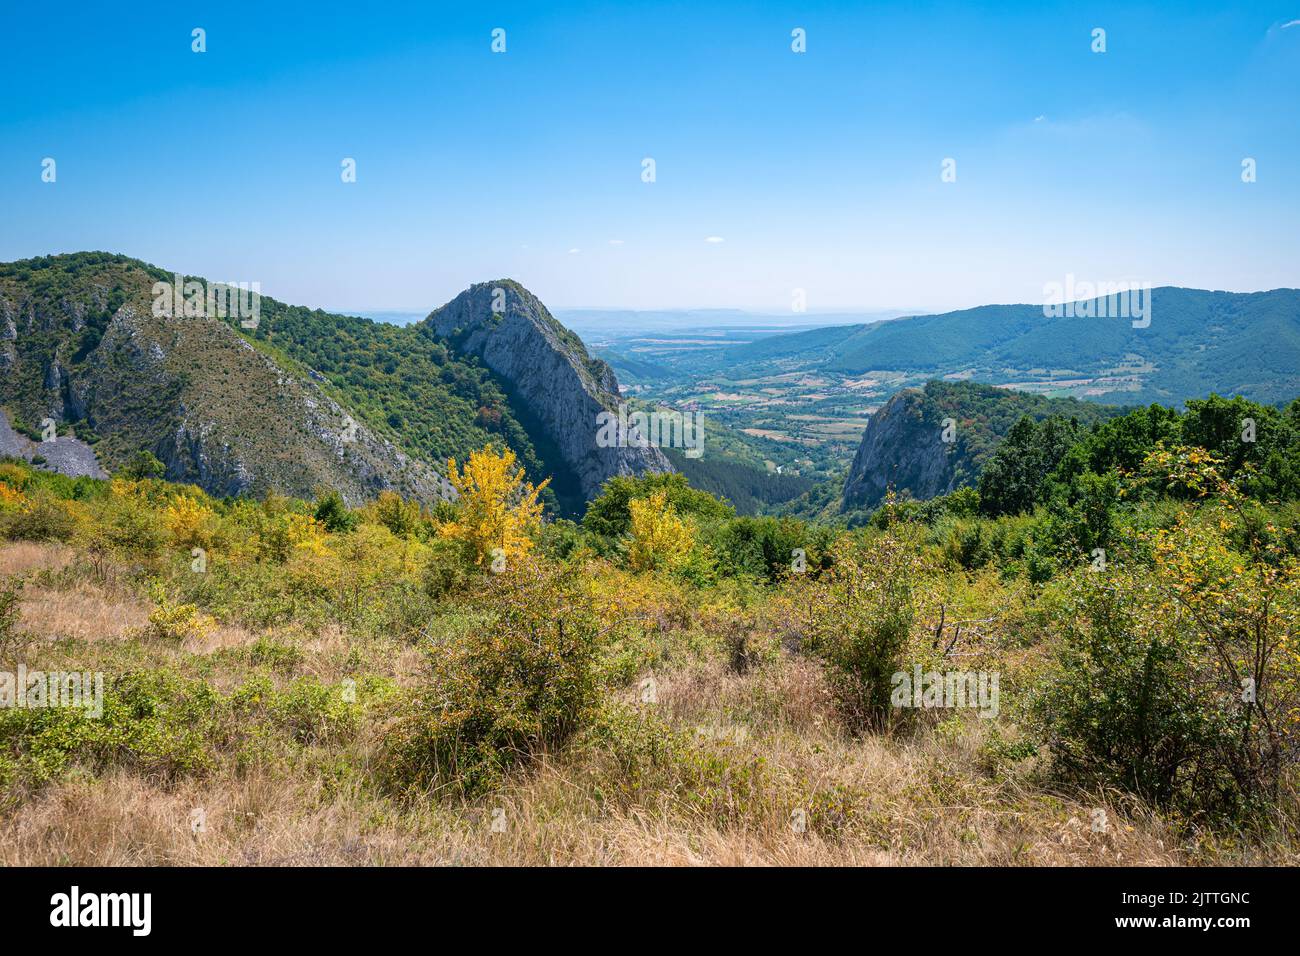 View from The Trascău Mountains on the valley and mountains near Vălișoara in Transylvania, Romania in southwesterly direction. Stock Photo